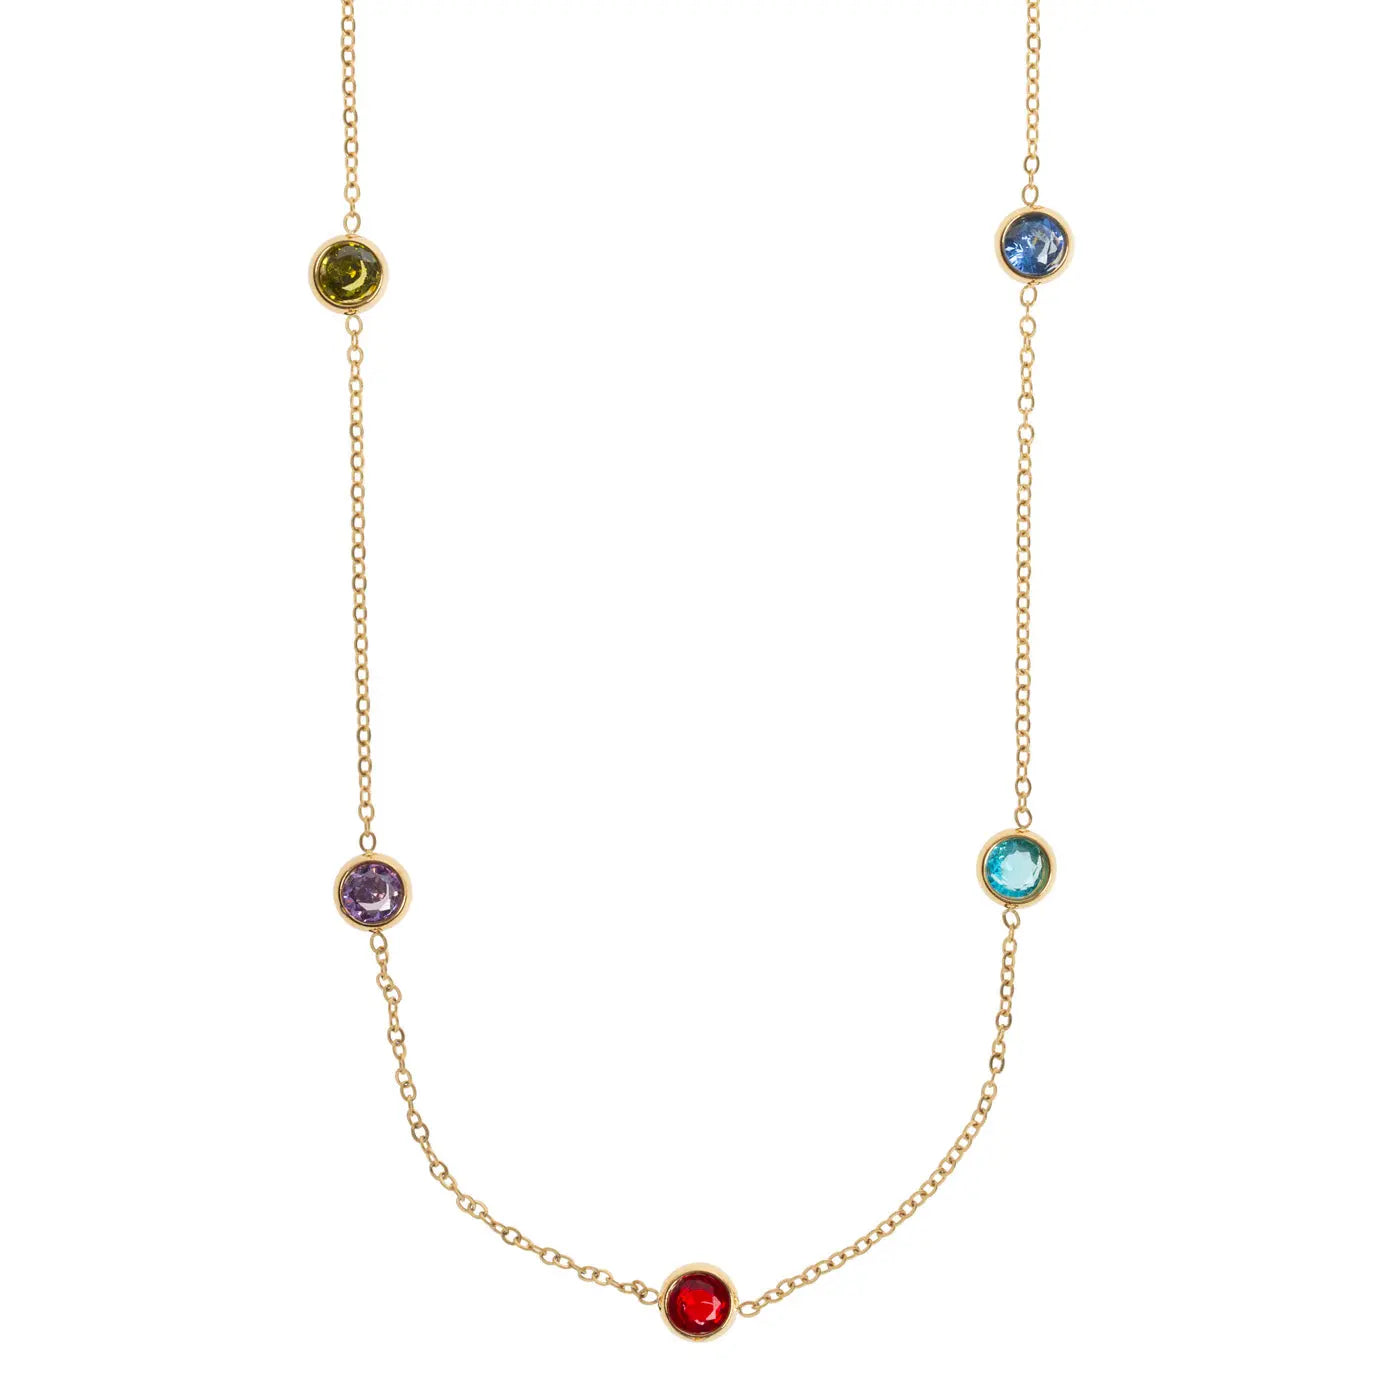 Michelle - Necklace with Gold Dipped Multi Colored Crystals Stainless